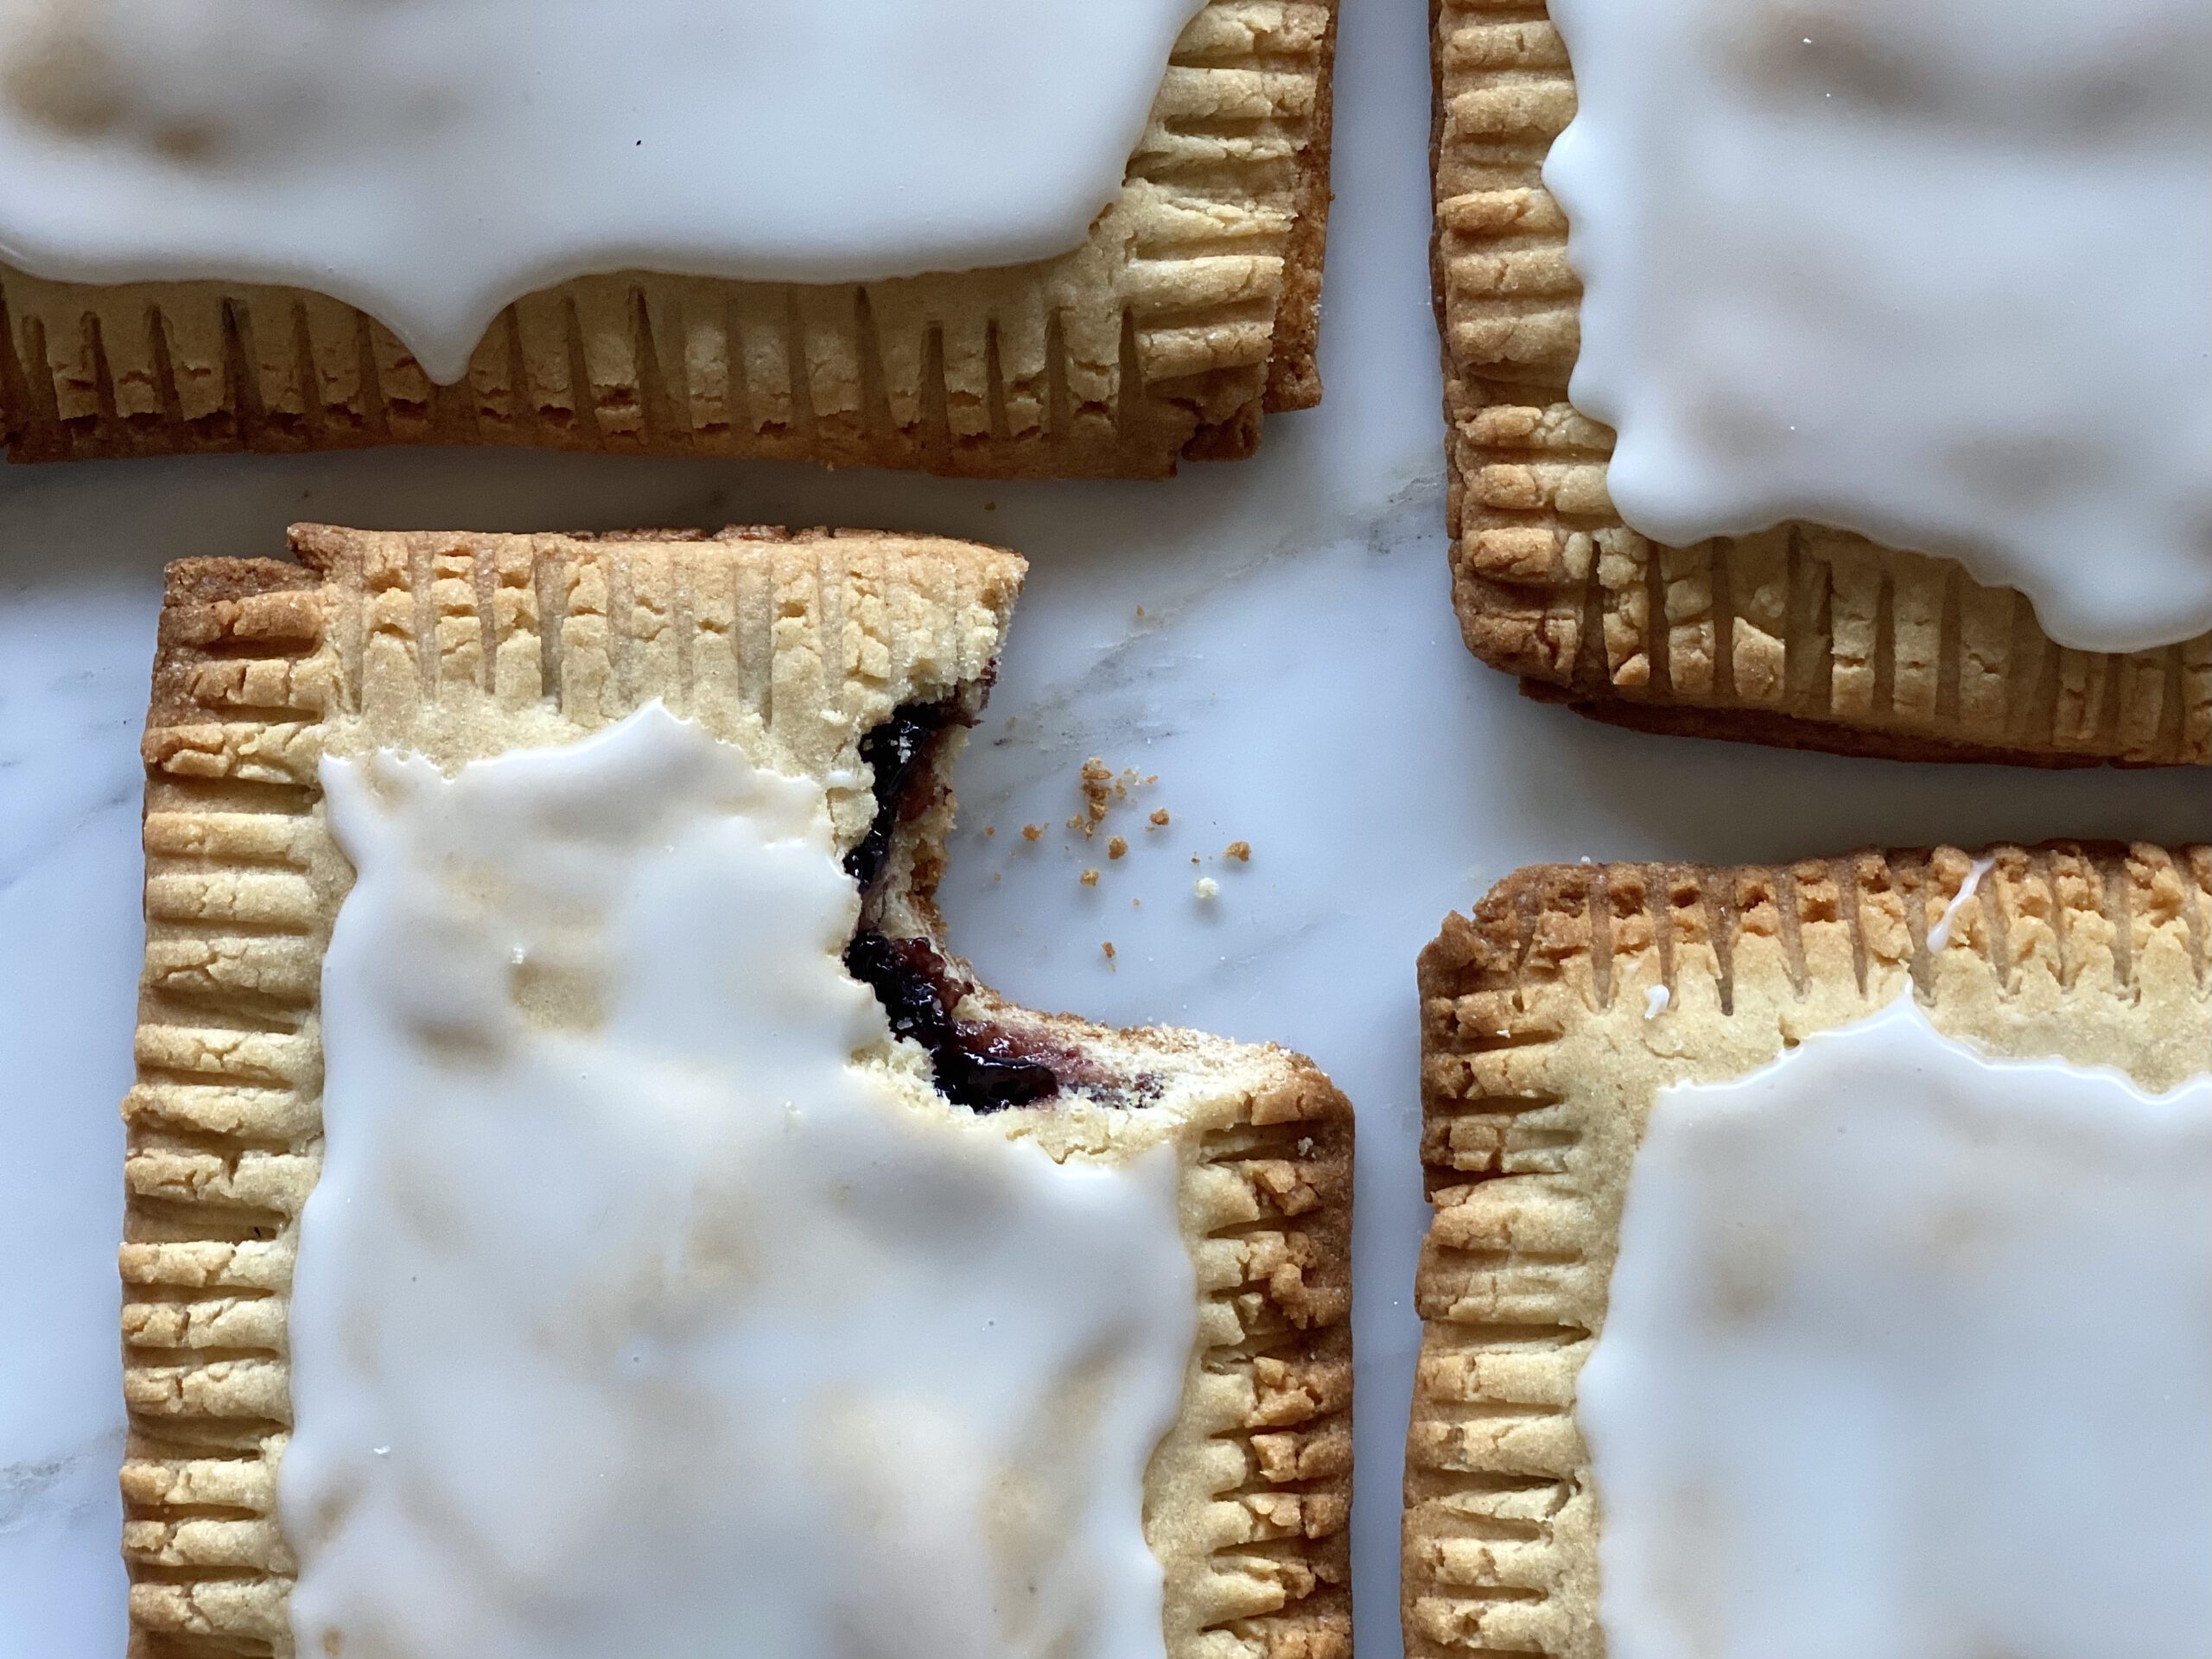 Homemade copycat pop tart with flaky dough and sweet jam filling, a nostalgic breakfast treat reimagined.